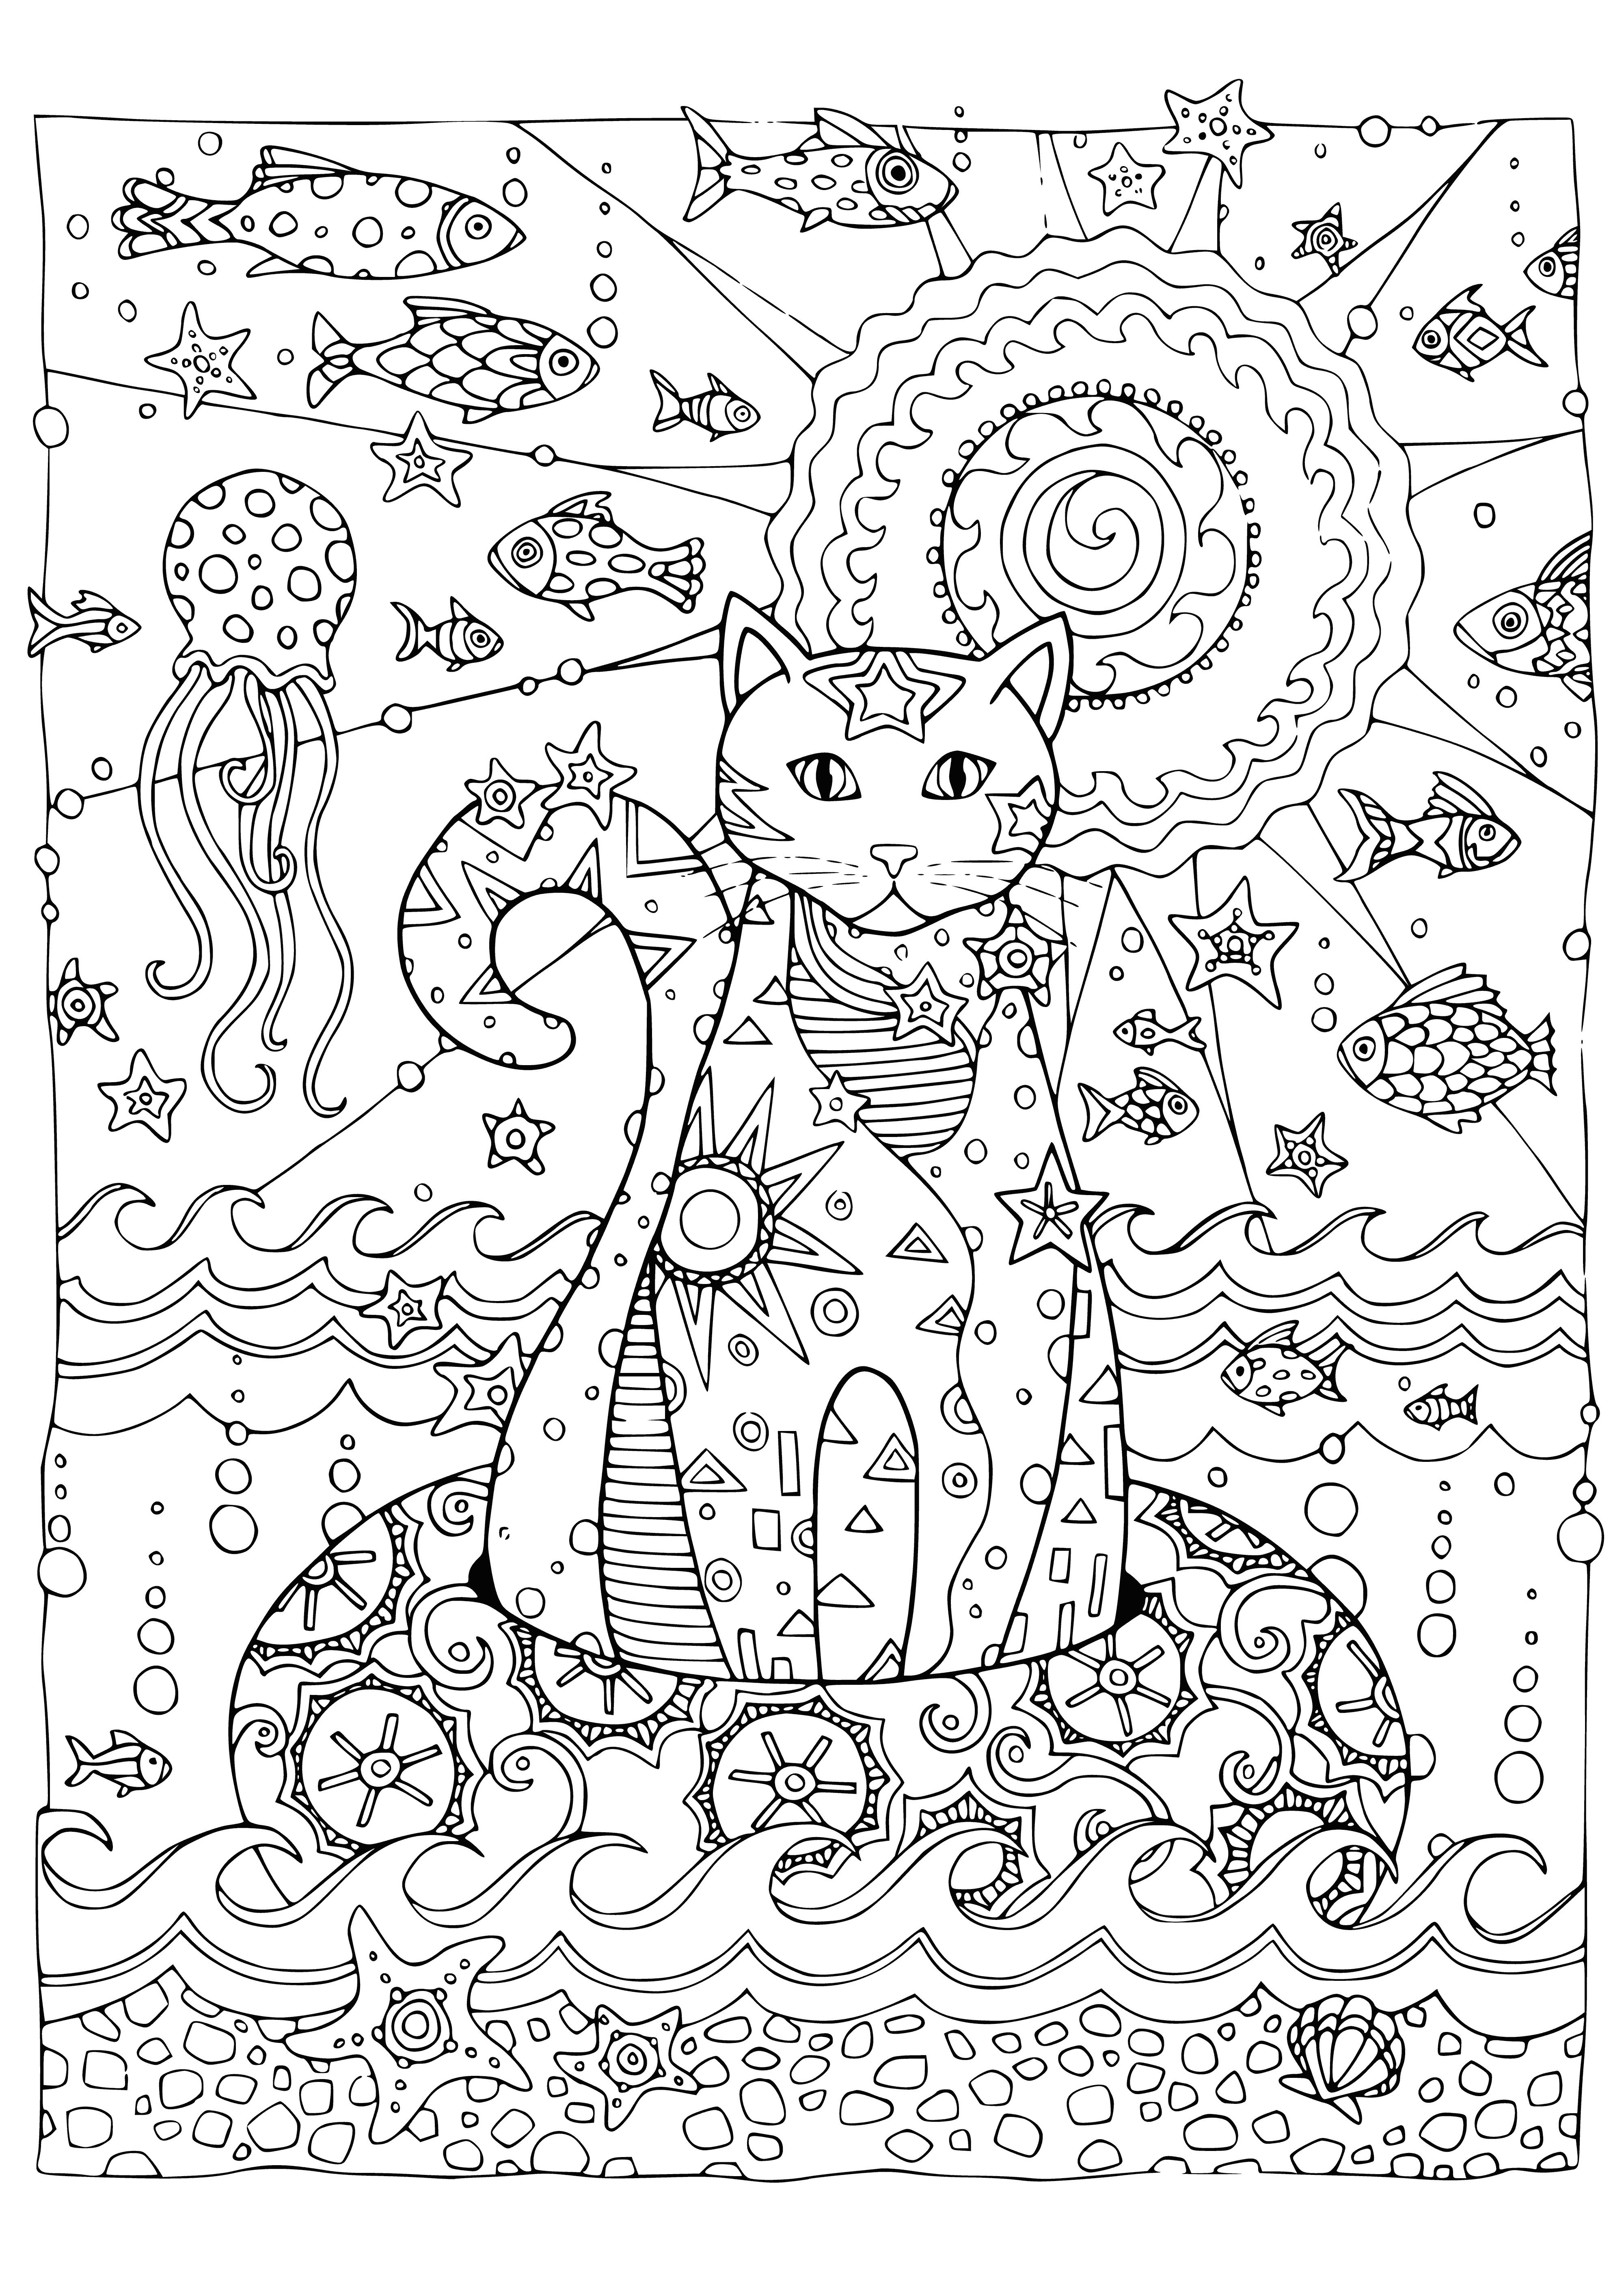 coloring page: Sleeping white cat with blue eyes on the shore of a body of water, head turned and paw extended.